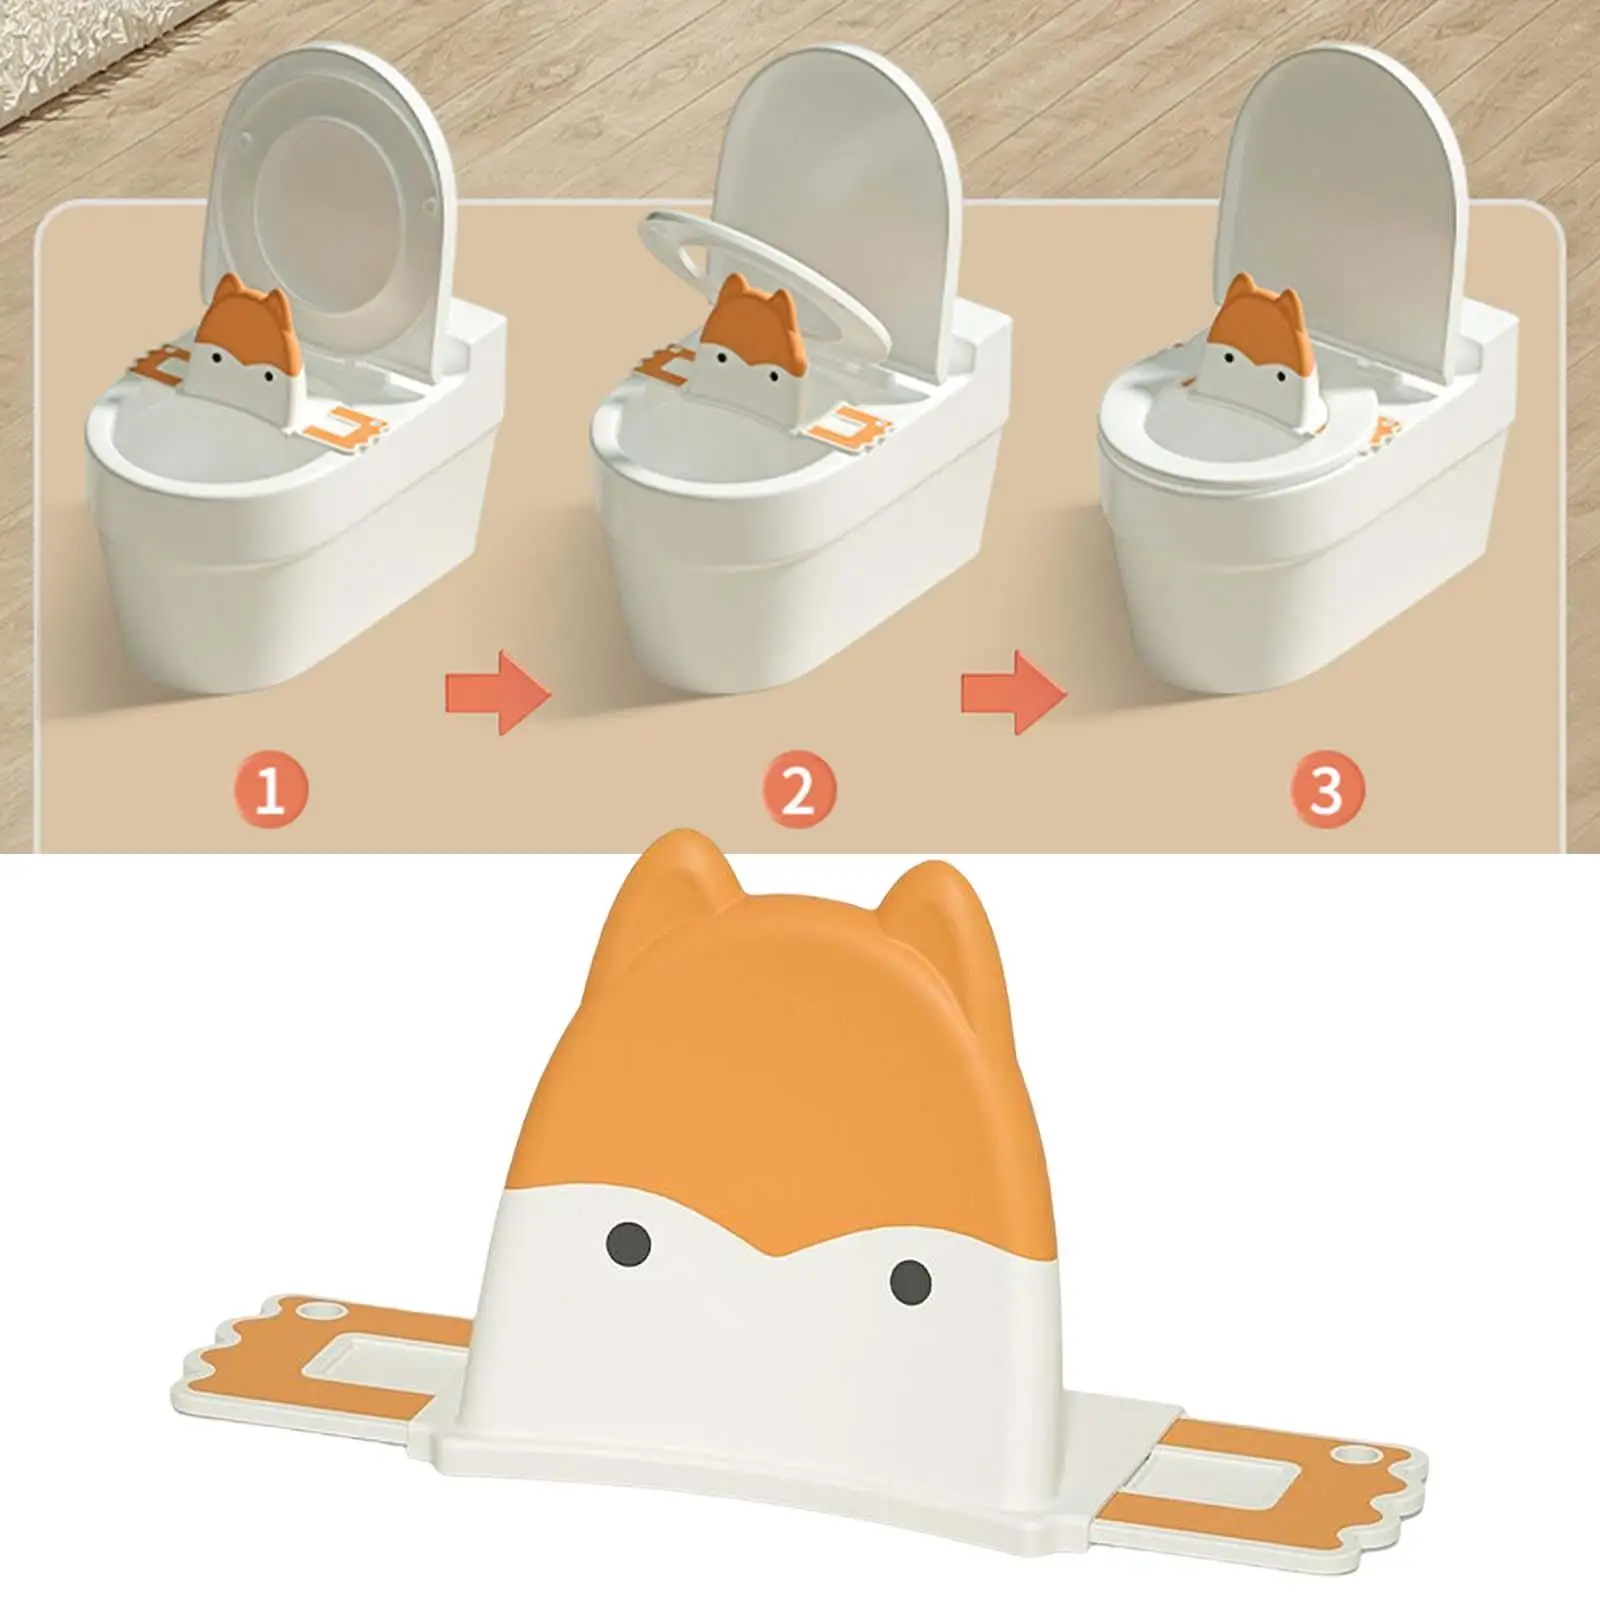 Baby Toilet Training Seat Cushion Adjustable Portable Easy Clean Universal Stable Potties Seat for Kids Children Boys Girls